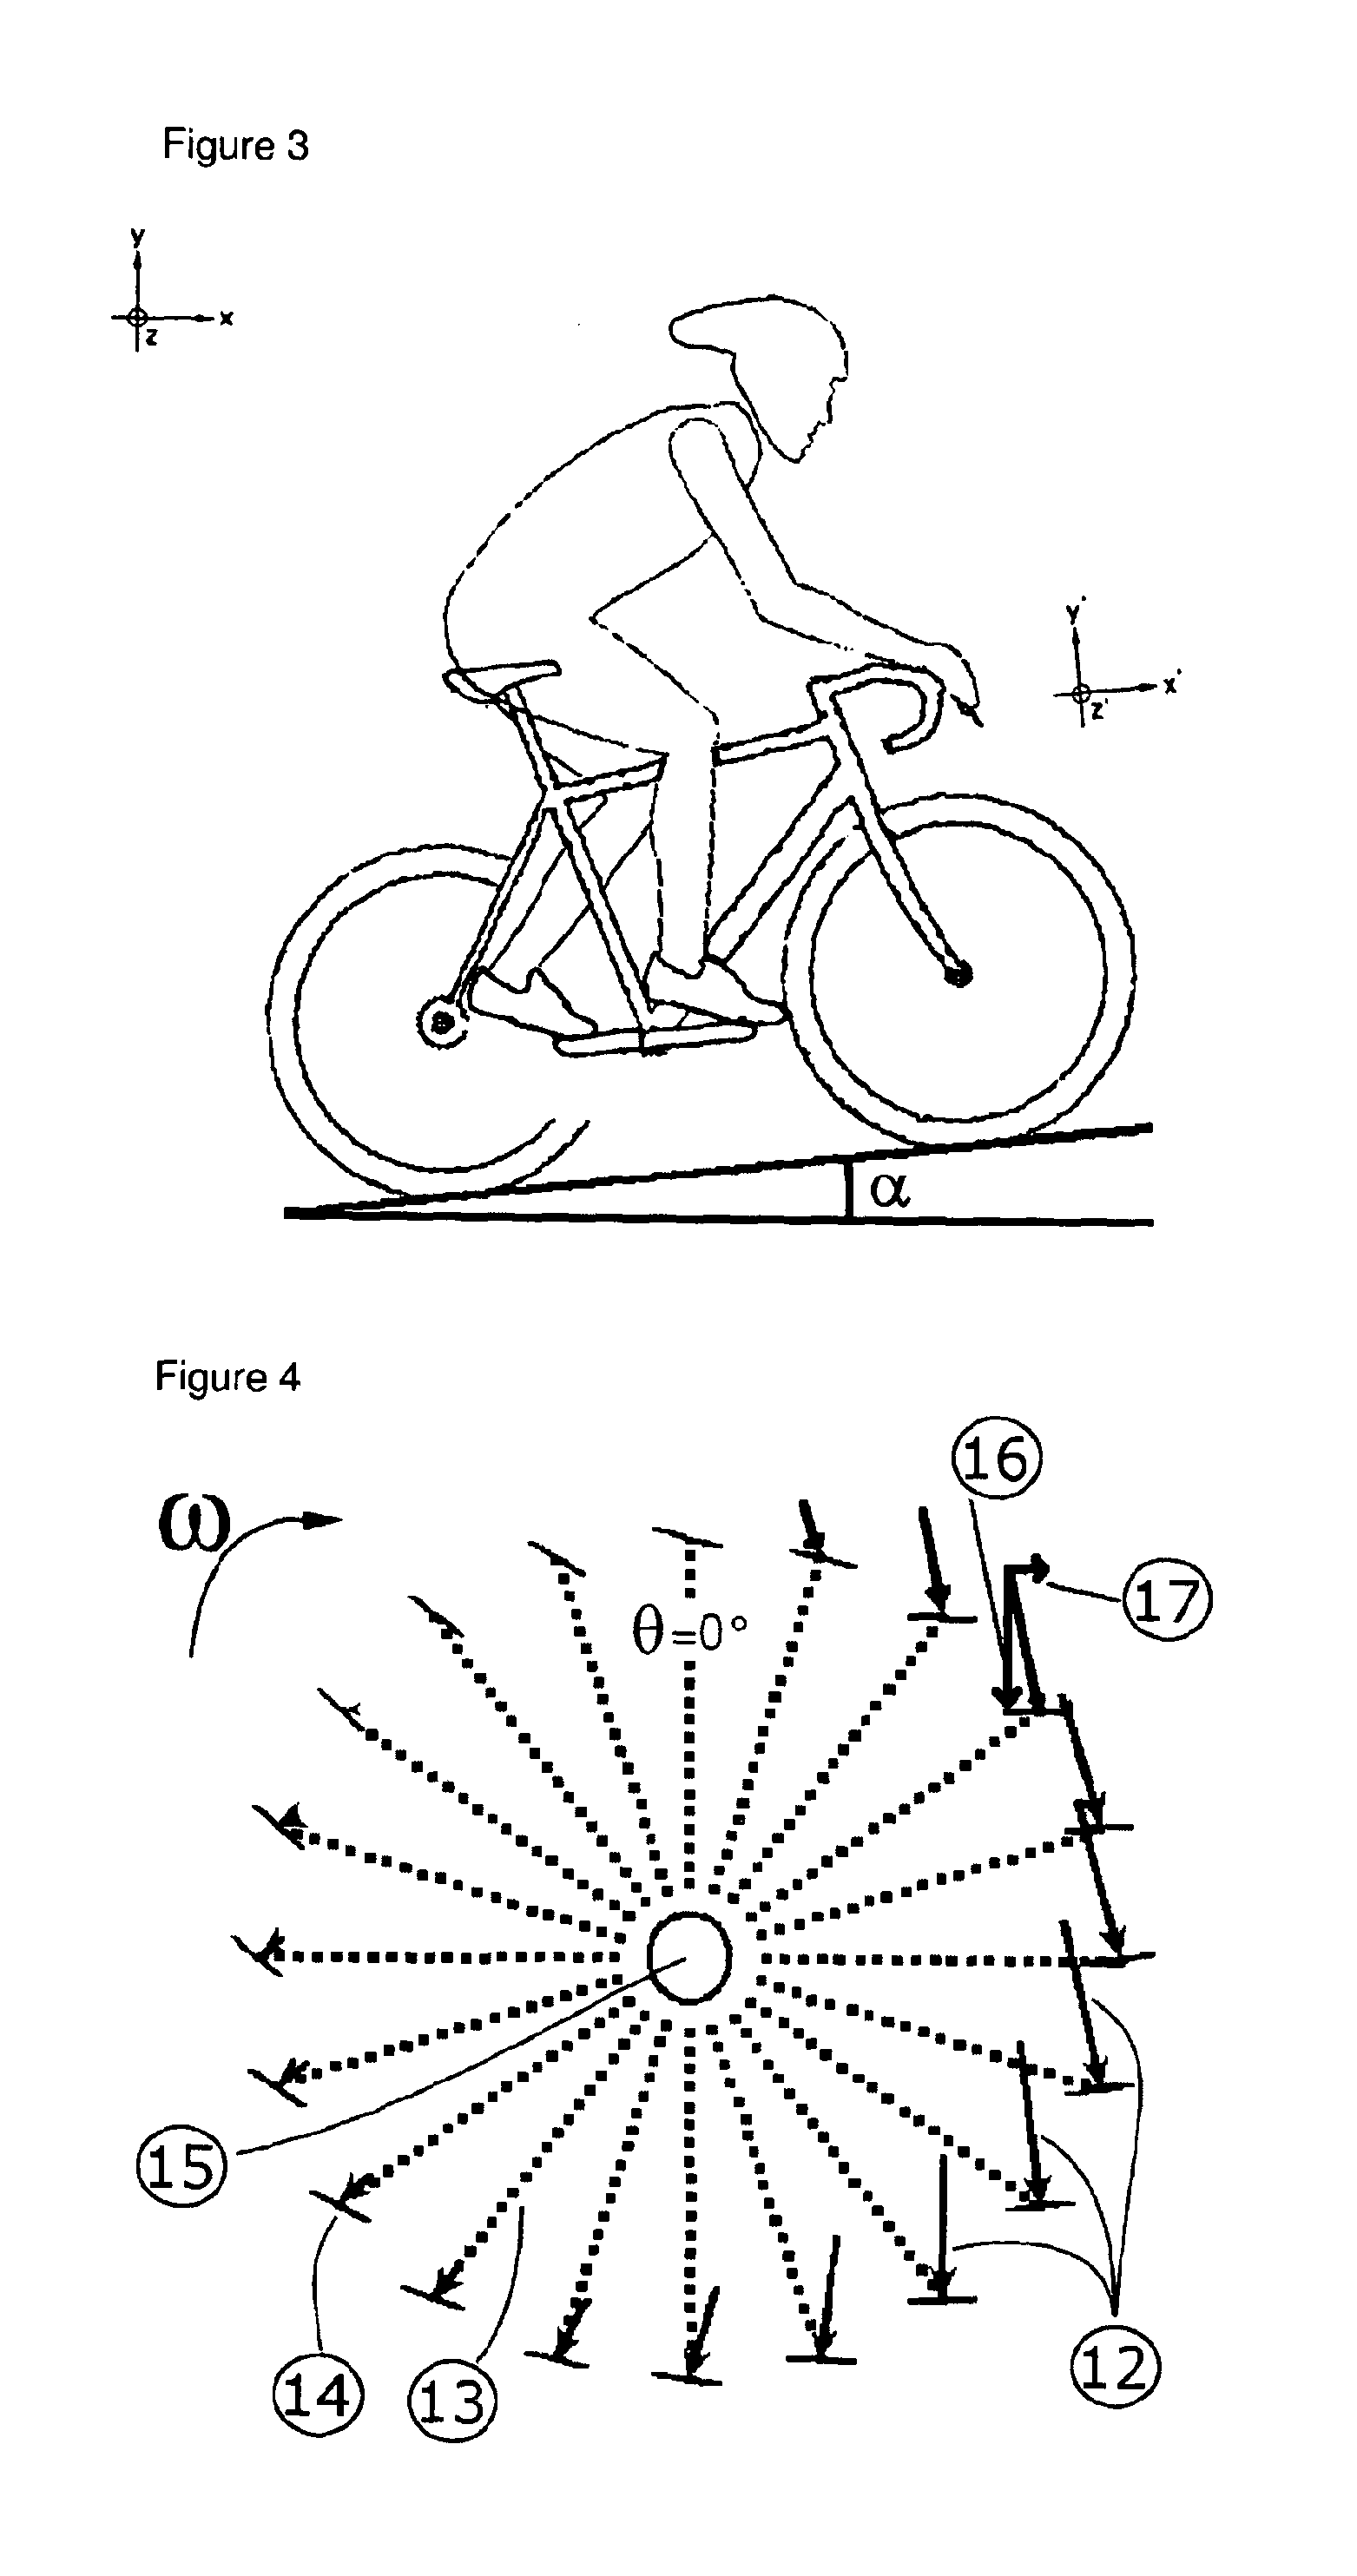 Real-Time Calculation of Total Longitudinal Force and Aerodynamic Drag Acting on a Rider on a Vehicle